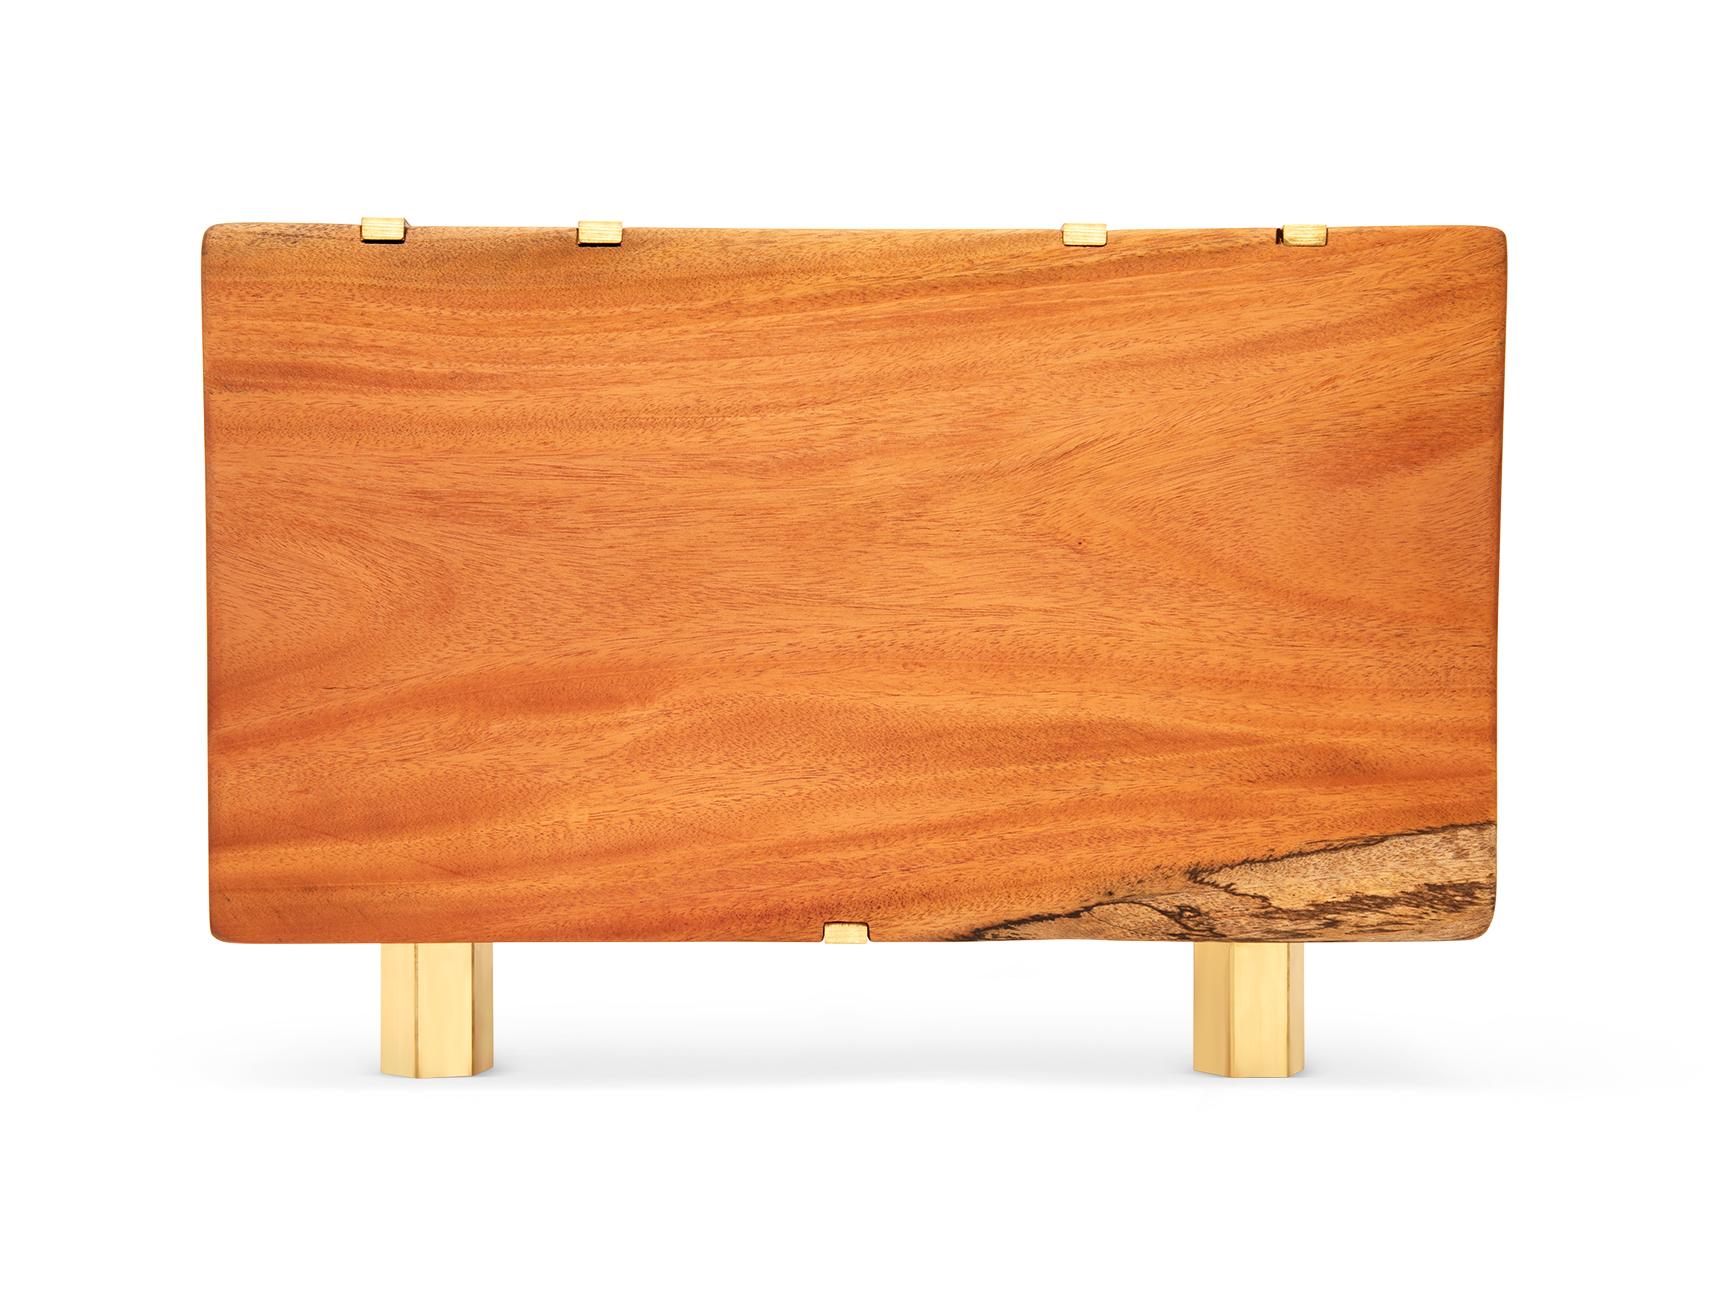 Hand-Crafted Cinco Cuerda II: Eclectic Mahogany & Brass-Lined Coffee Table For Sale